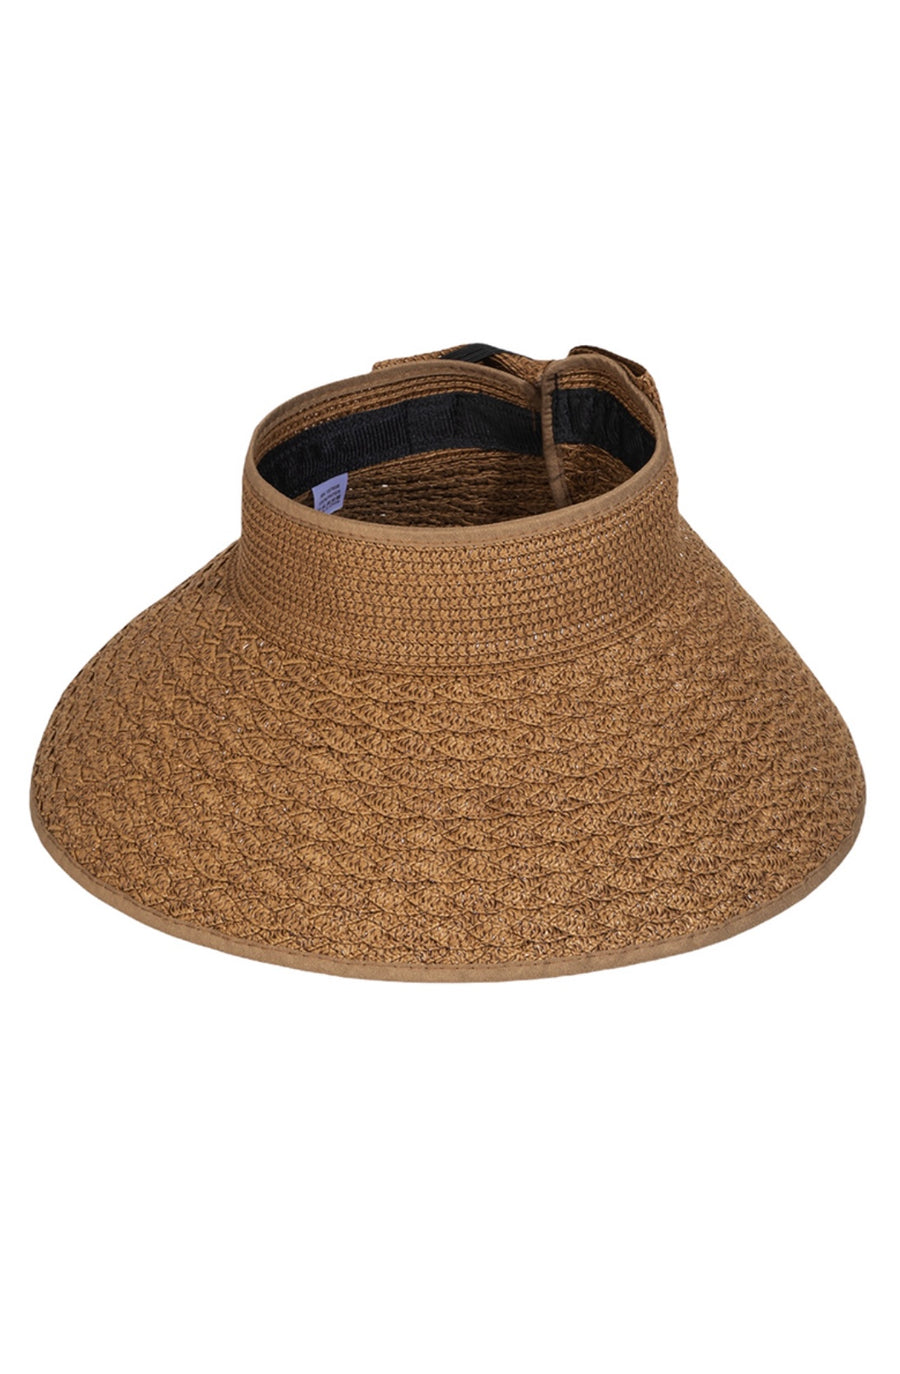 Straw visor with bow detail.